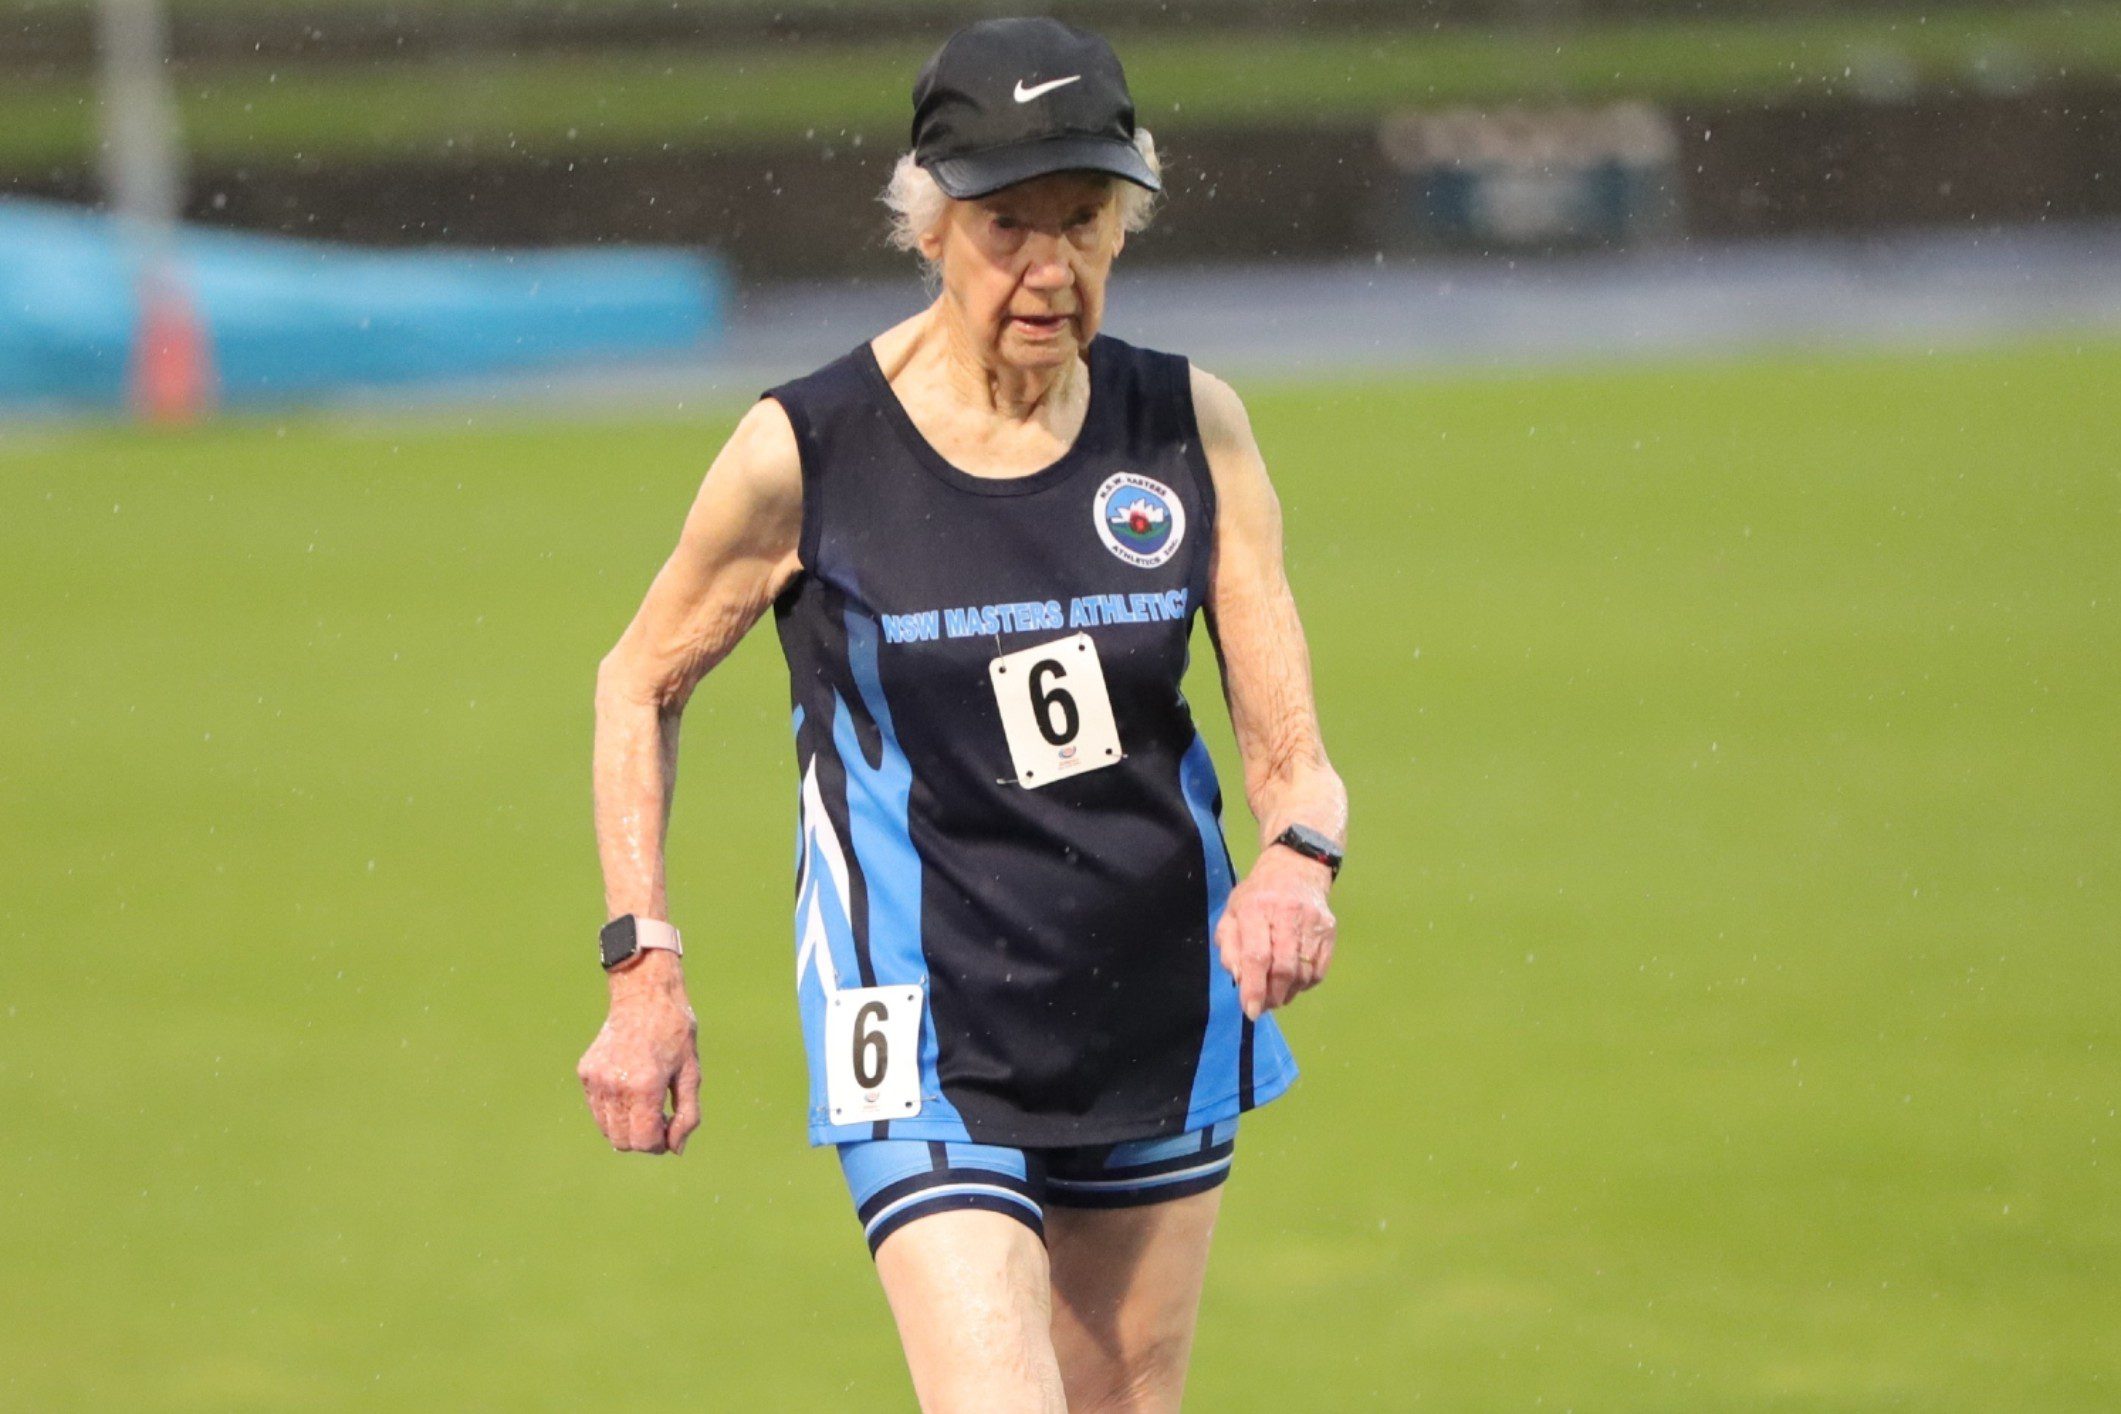 World record breaking at 95, Heather Lee can’t stop walking